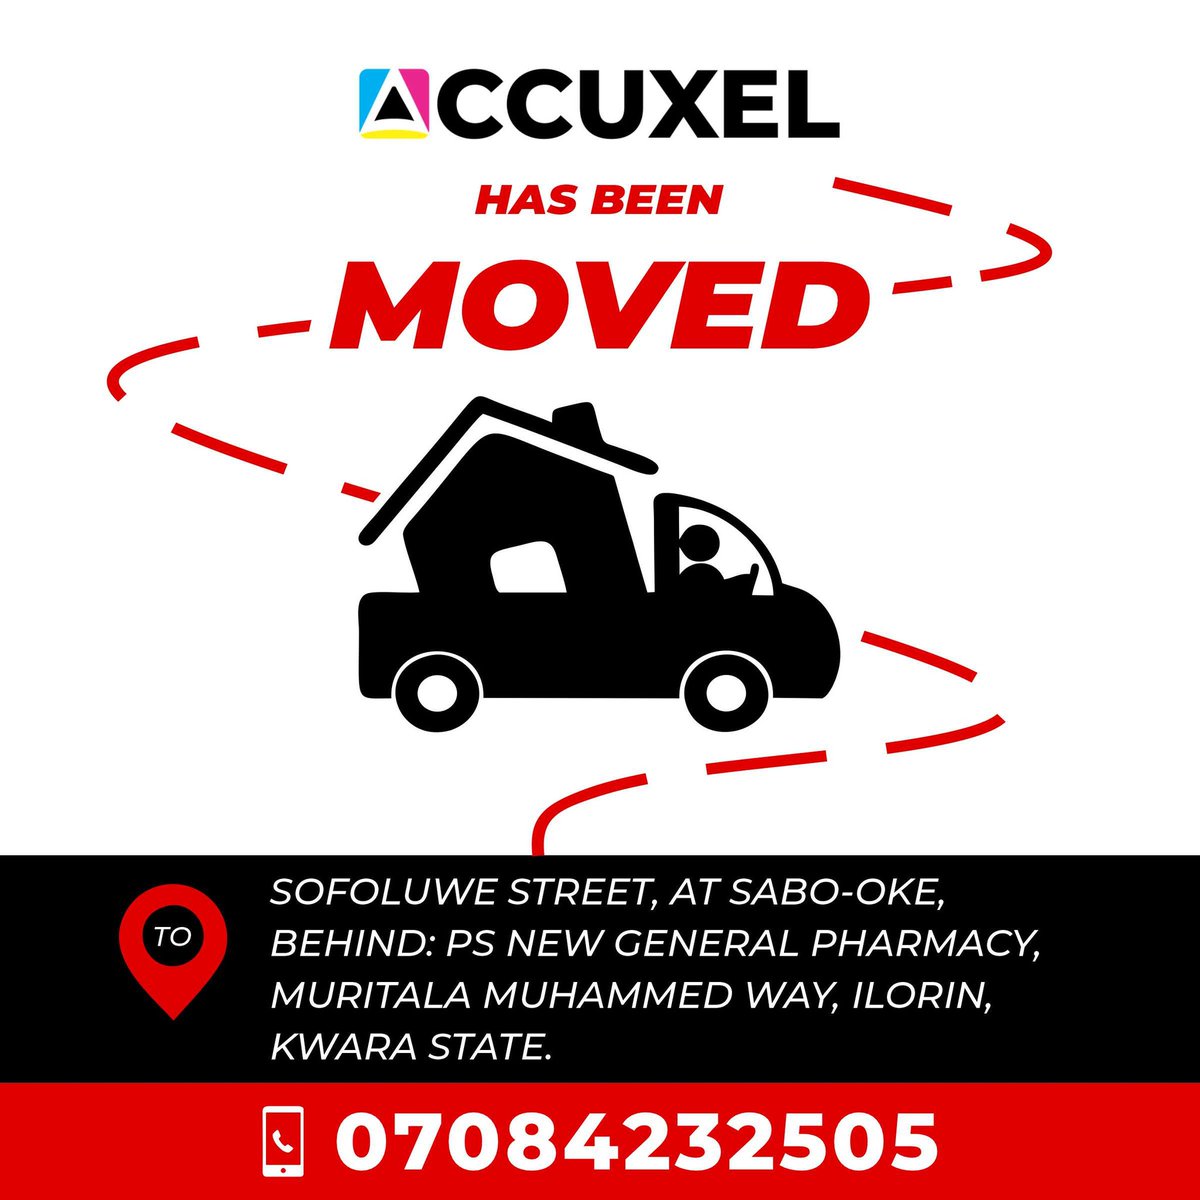 As with everything, growth is important. Please be informed that WE HAVE MOVED!!!